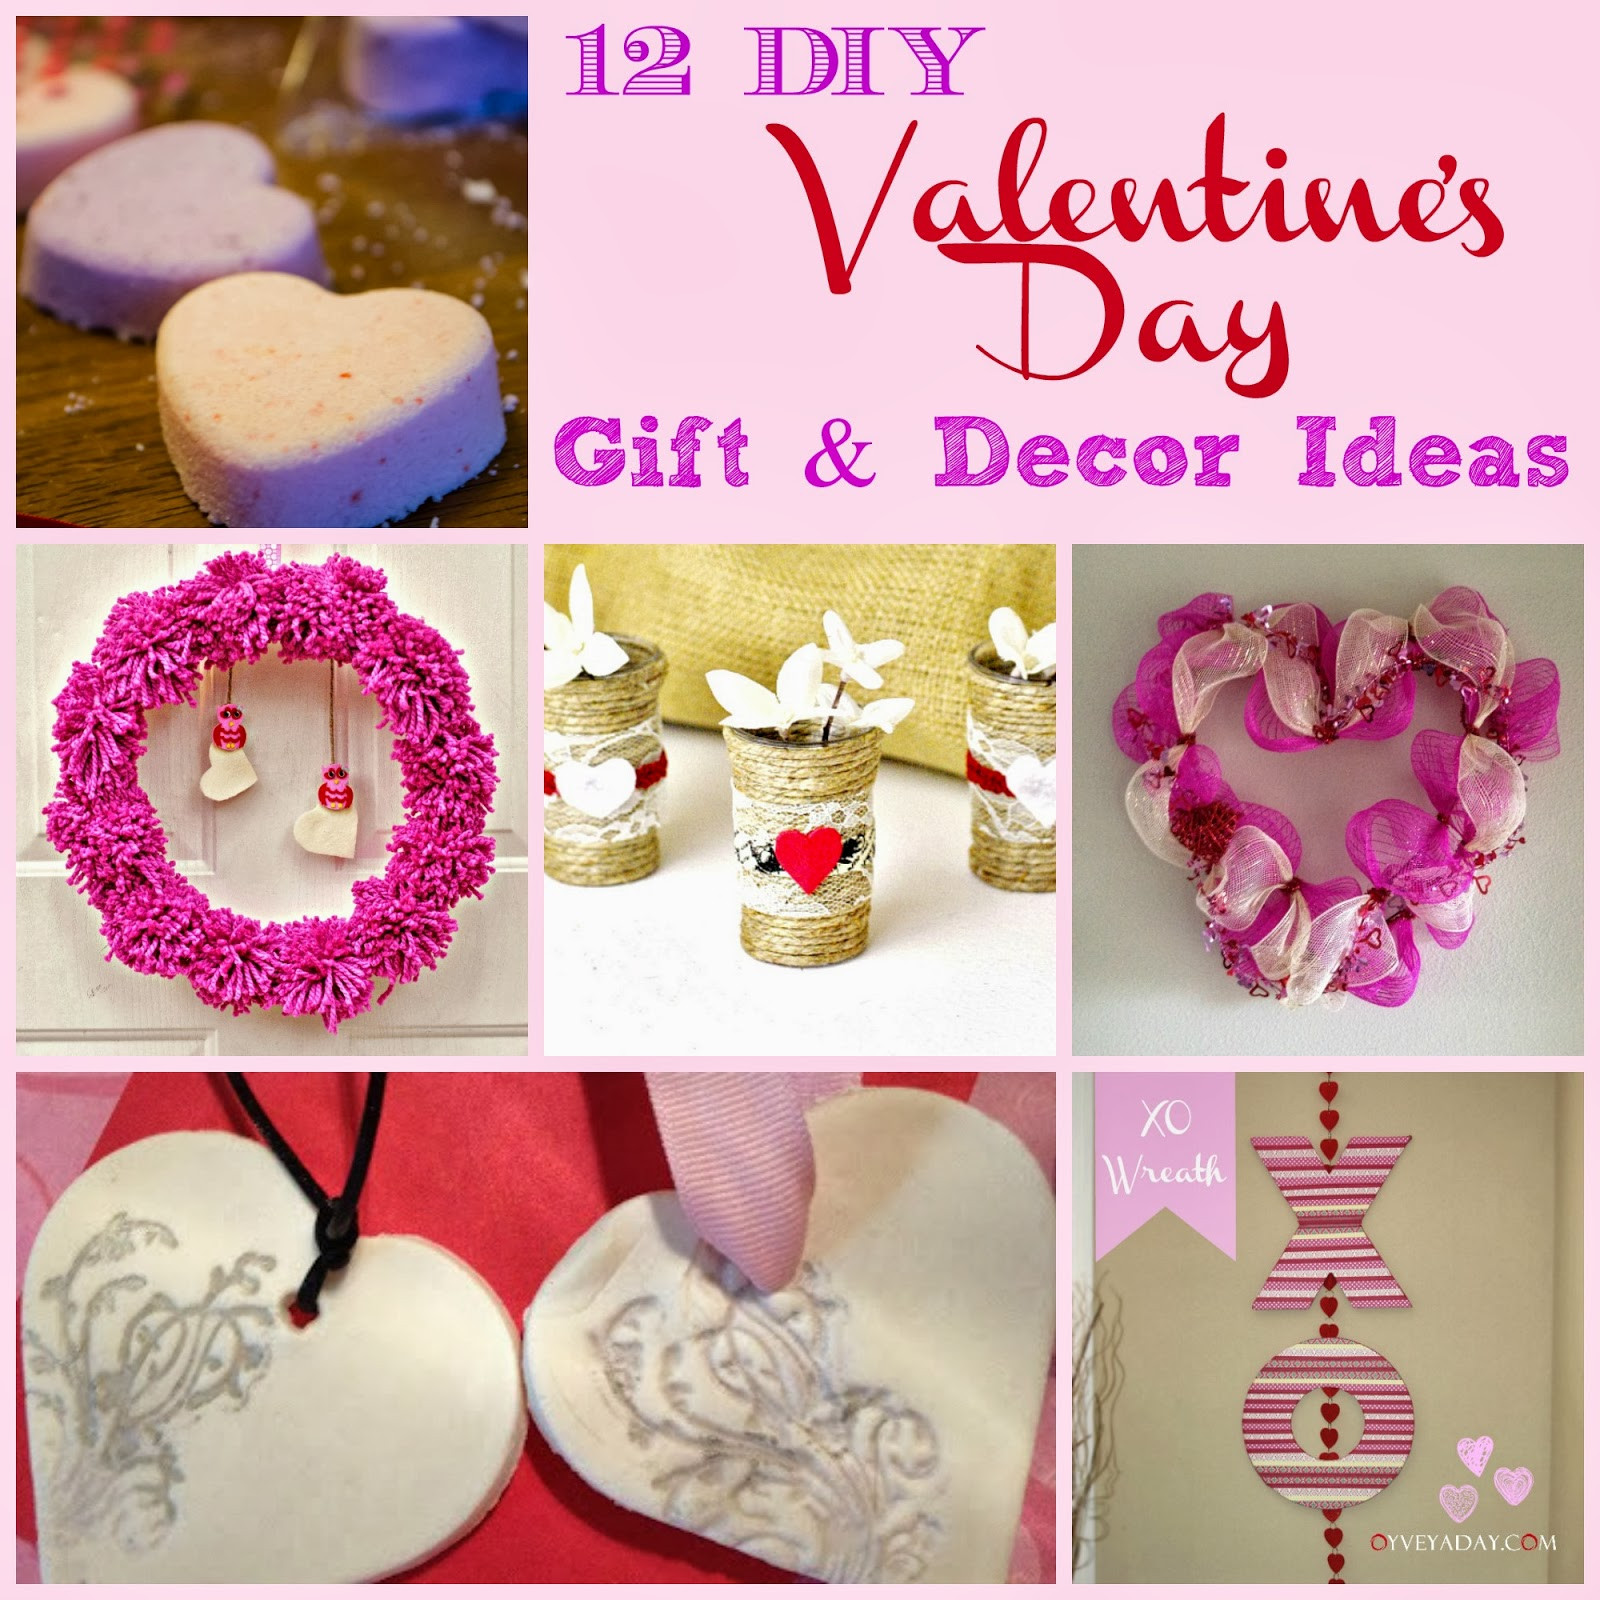 Best ideas about Valentine DIY Gift
. Save or Pin 12 DIY Valentine s Day Gift & Decor Ideas Outnumbered 3 to 1 Now.